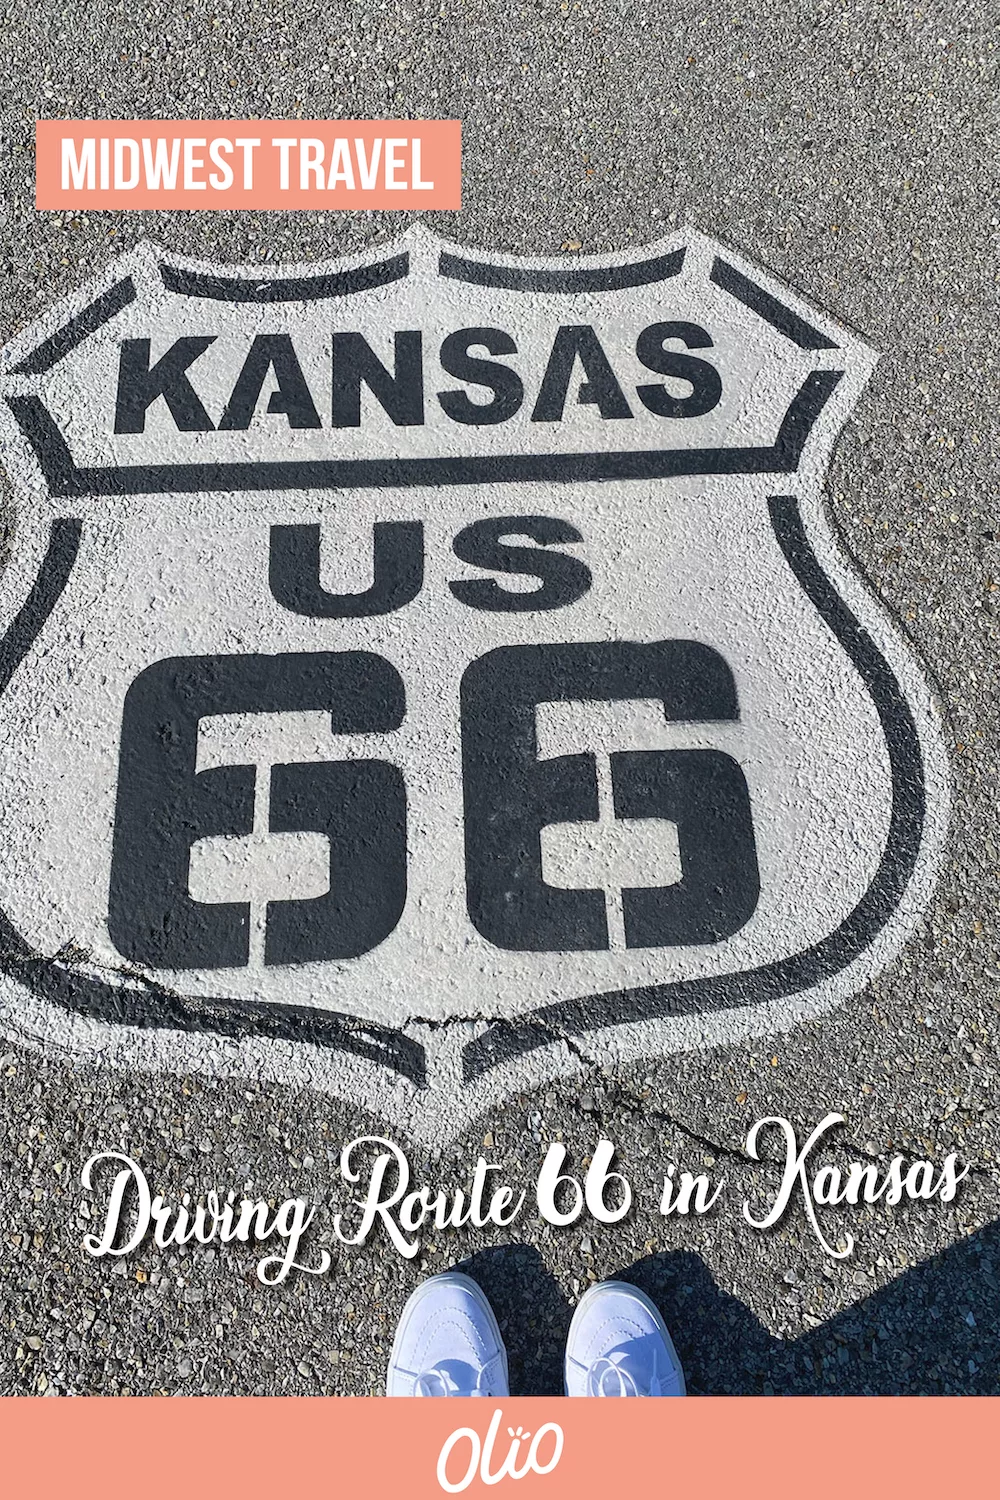 Get your kicks on Route 66 in Kansas! While the Sunflower State only has 13.2 miles of the Mother Road, there’s still plenty of things to see while driving Route 66. This post includes everything you need to plan your road trip along Route 66 in Kansas. From must-see attractions to places to eat and drink to incredible accommodations, be sure to bookmark this comprehensive guide to help with your Route 66 road trip planning. #Route66 #Kansas